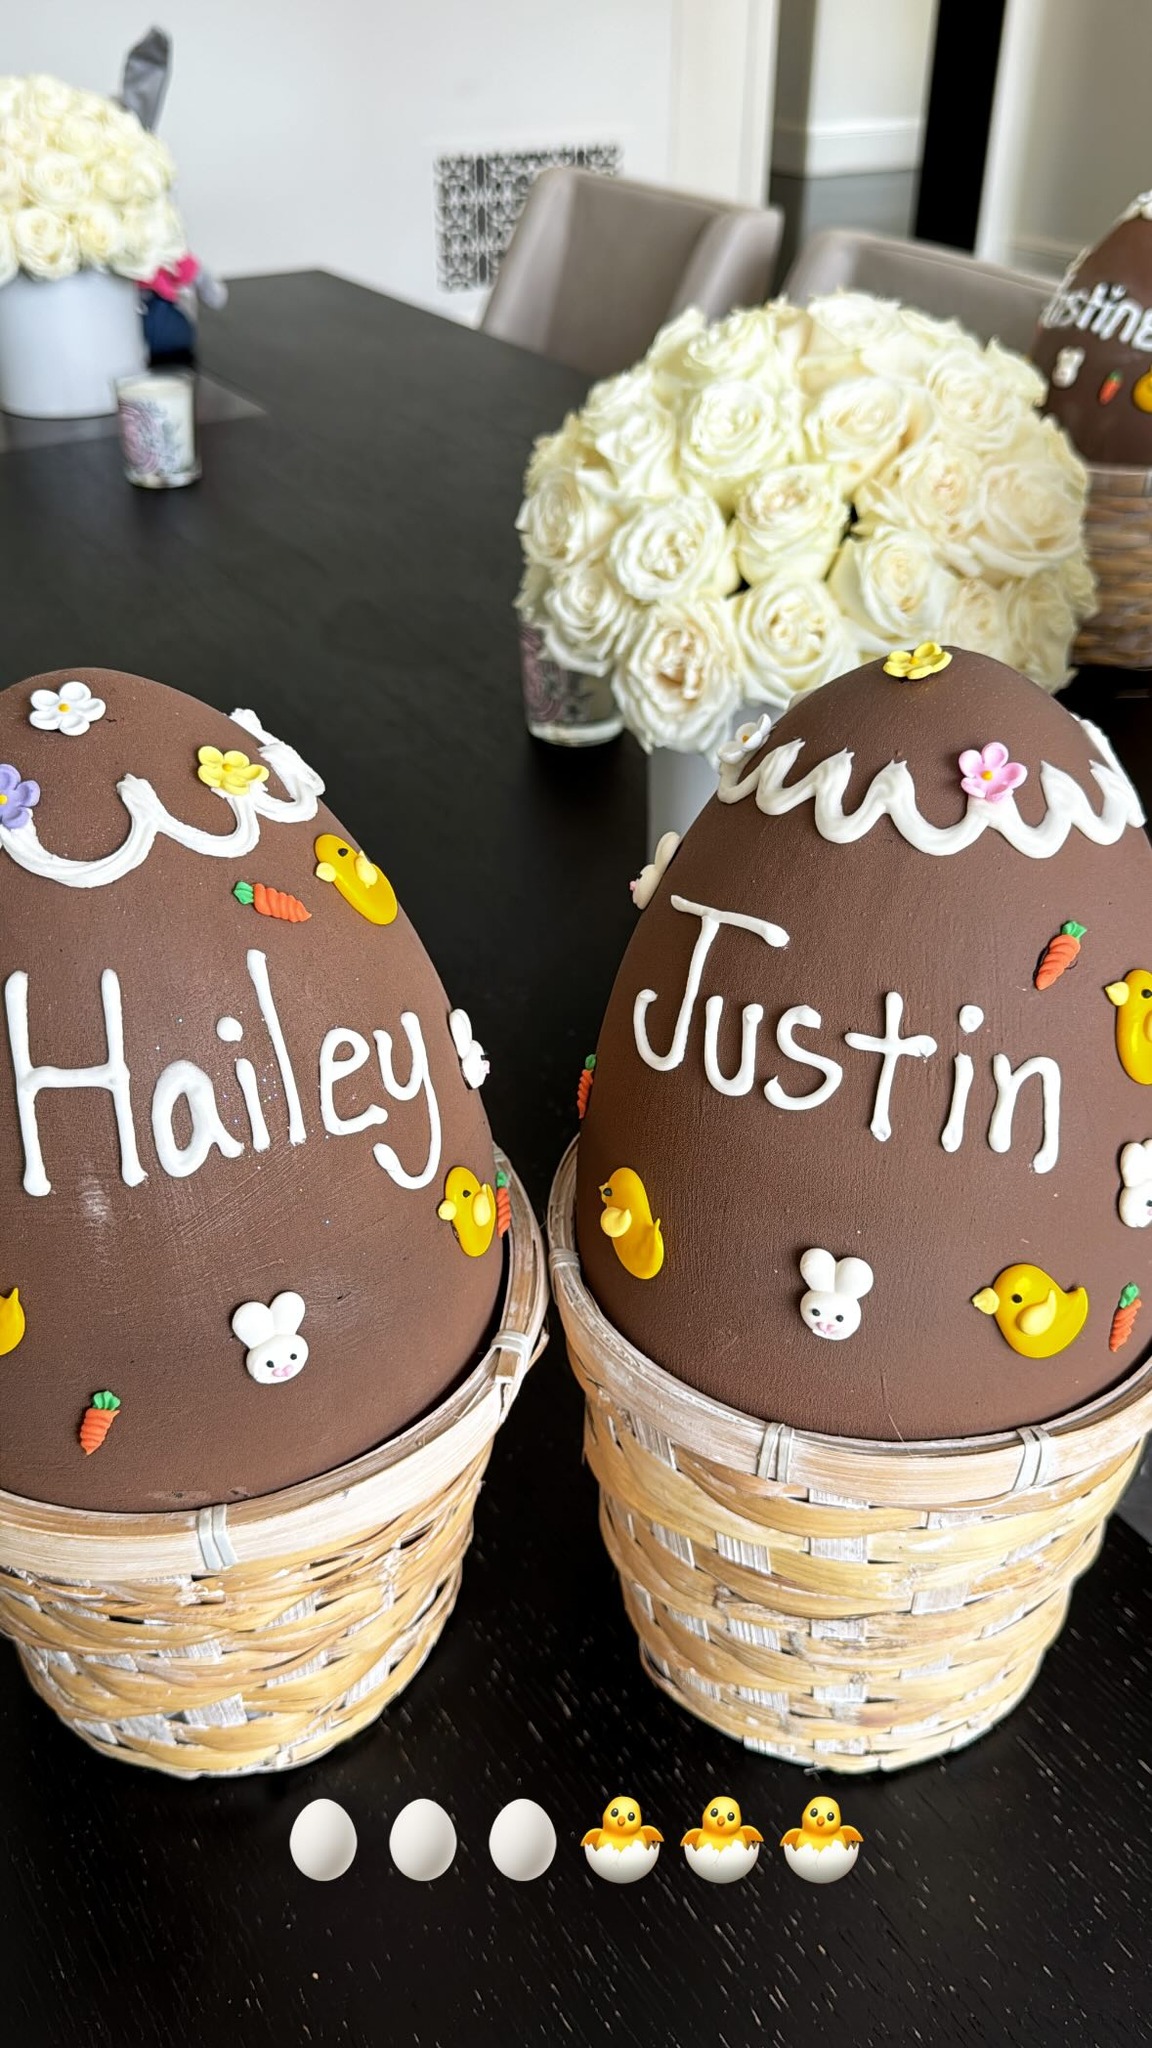 On Sunday, Hailey posted a photo on her Instagram Stories of a pair of Easter eggs with her and her pop star husband's names written on them